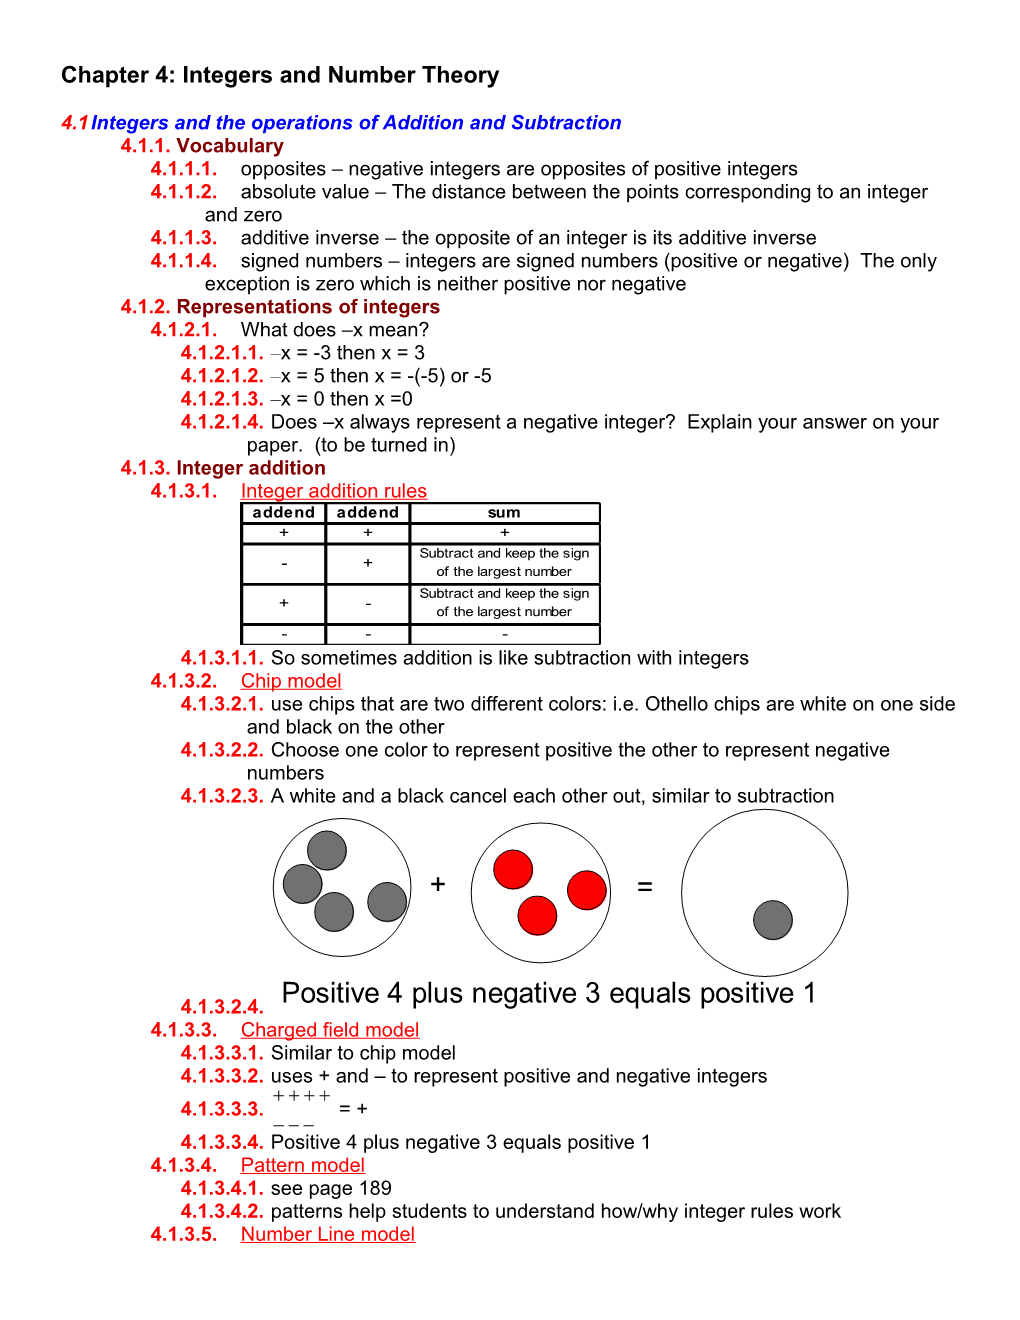 Chapter 4: Integers and Number Theory